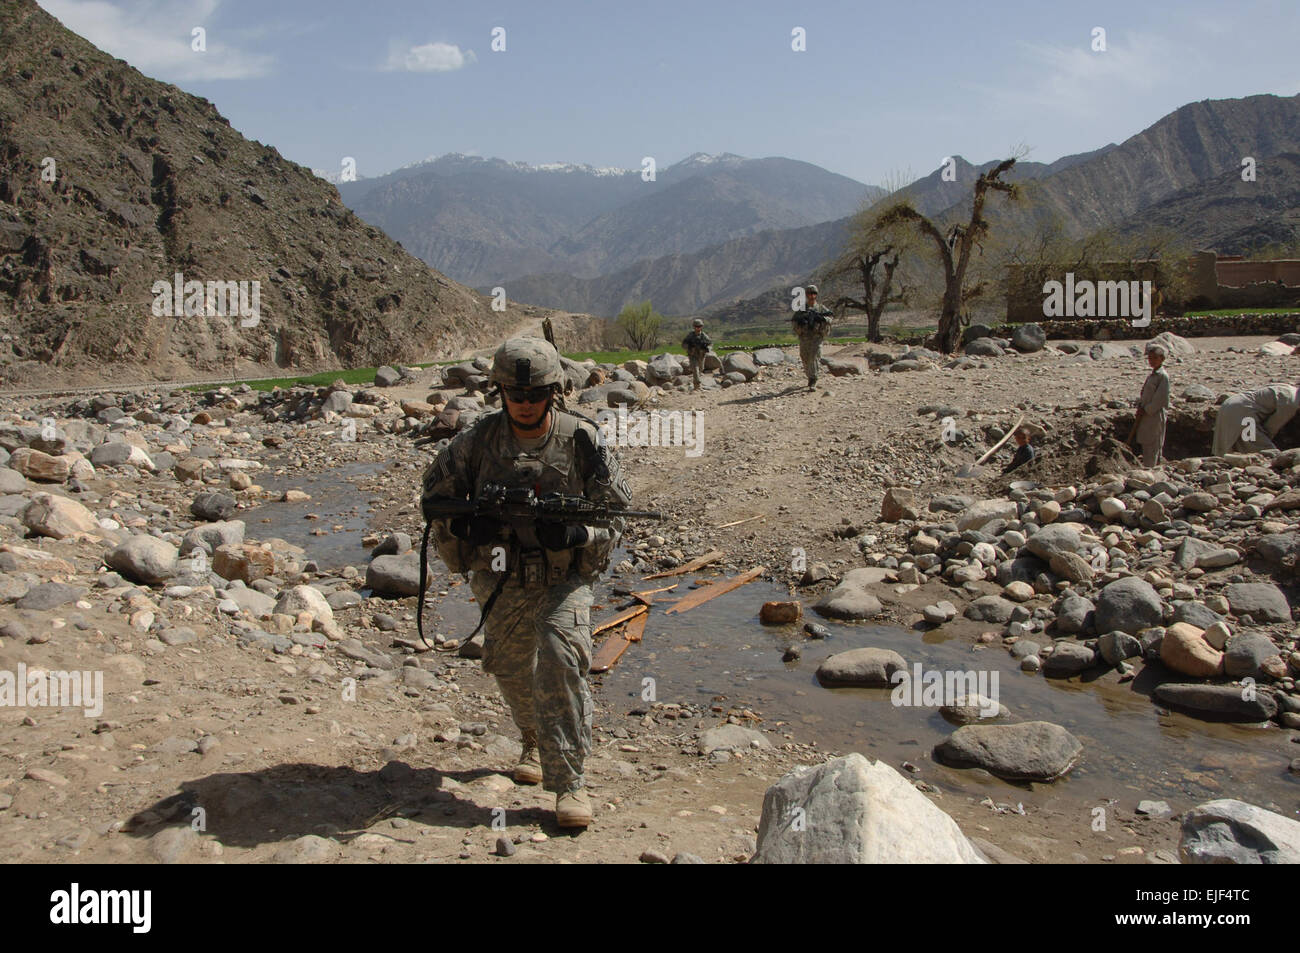 U.S. Army Spc. Gabriel Green crosses a stream while en route to Rechah Lam village in the Kunar province of Afghanistan March 20, 2008. Green is the forward observer for Weapons Squad, 1st Platoon, Chosen Company, 2nd Battalion, 503rd Infantry Airborne, 173rd Airborne Infantry Brigade. Thevillage is known to inhabit suspected anti-Afghan forces.  Staff Segt. Tyffani L. Davis Released Stock Photo